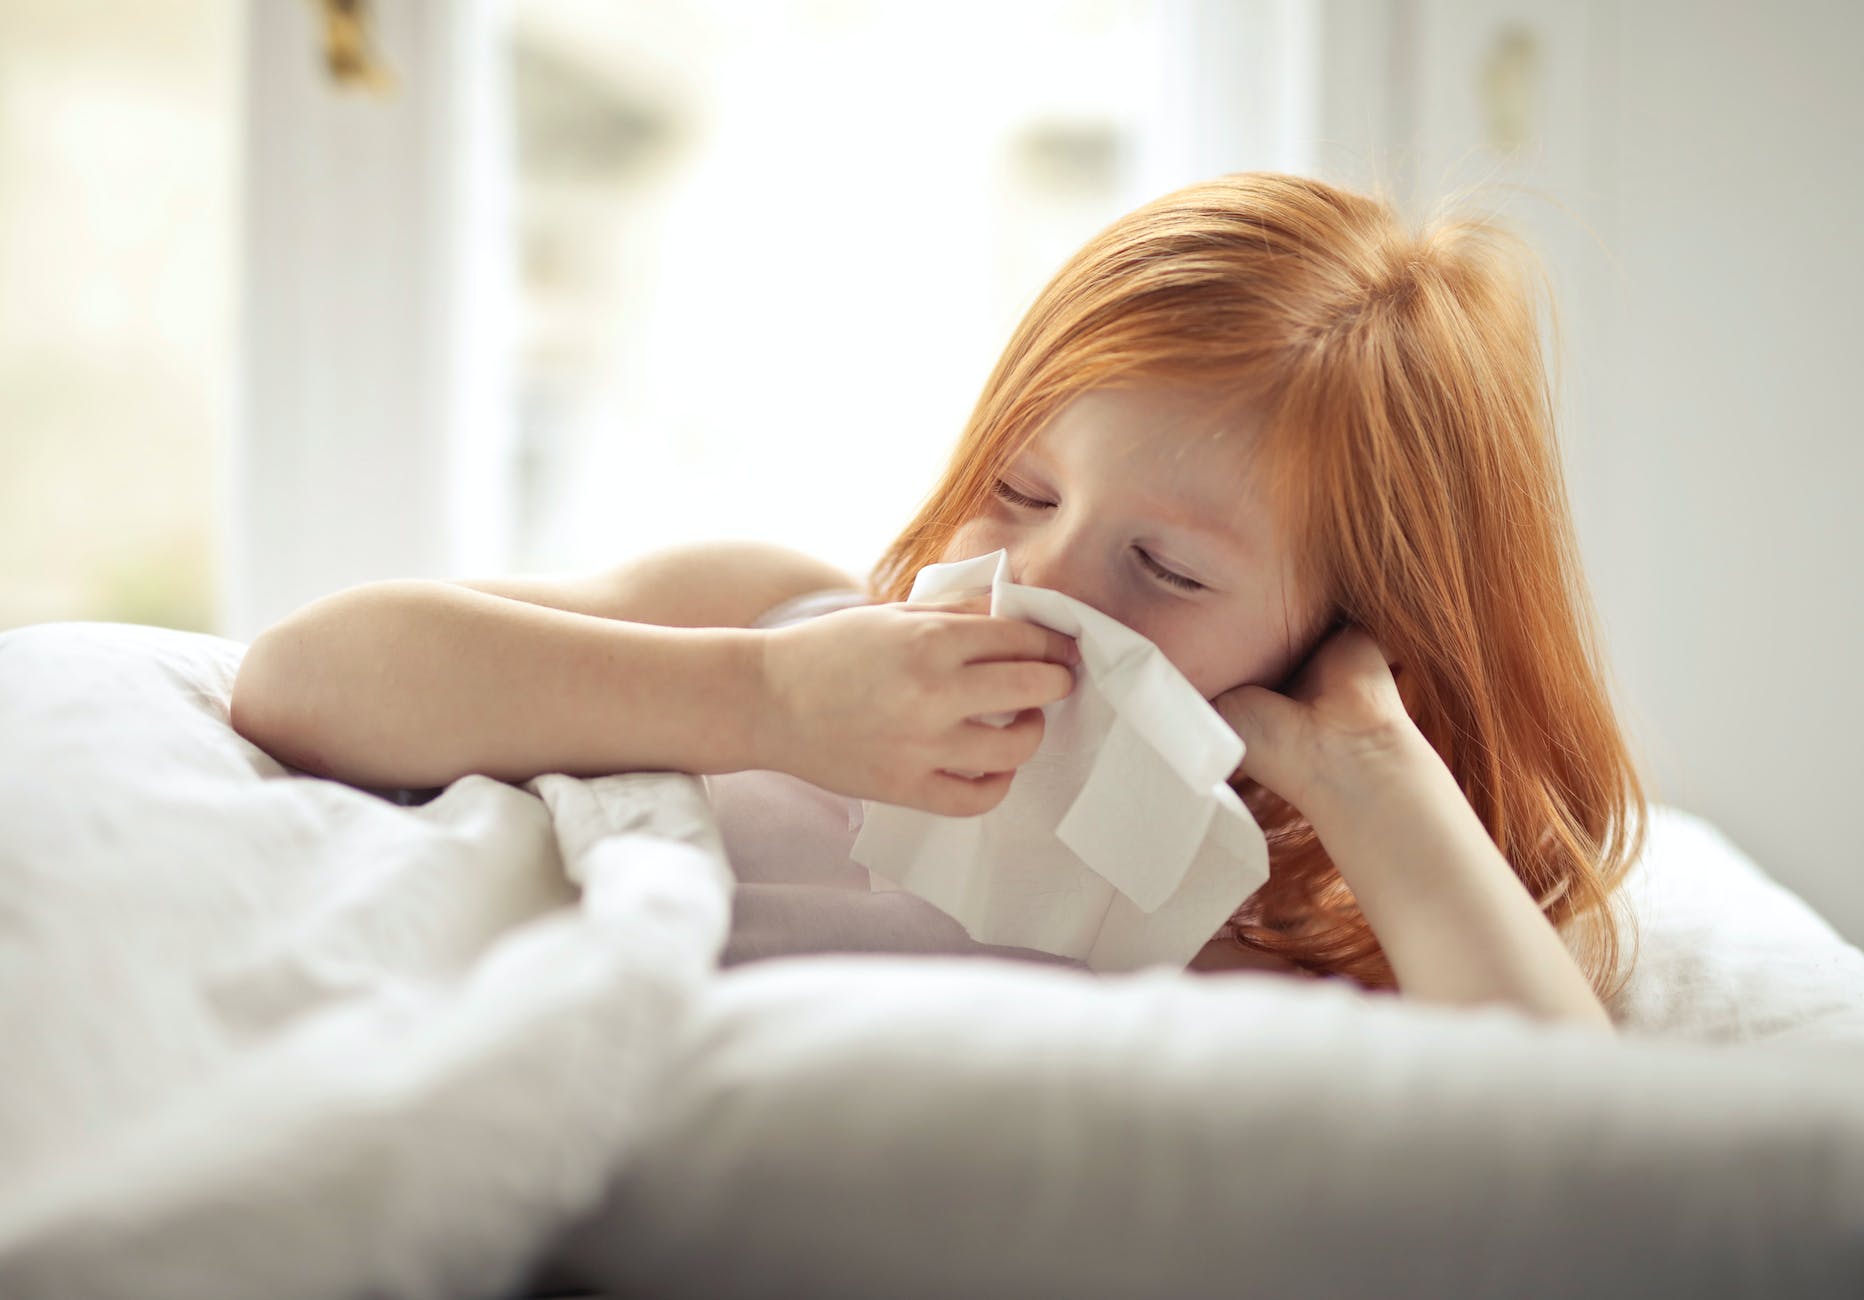 a sick girl wiping her nose with tissue